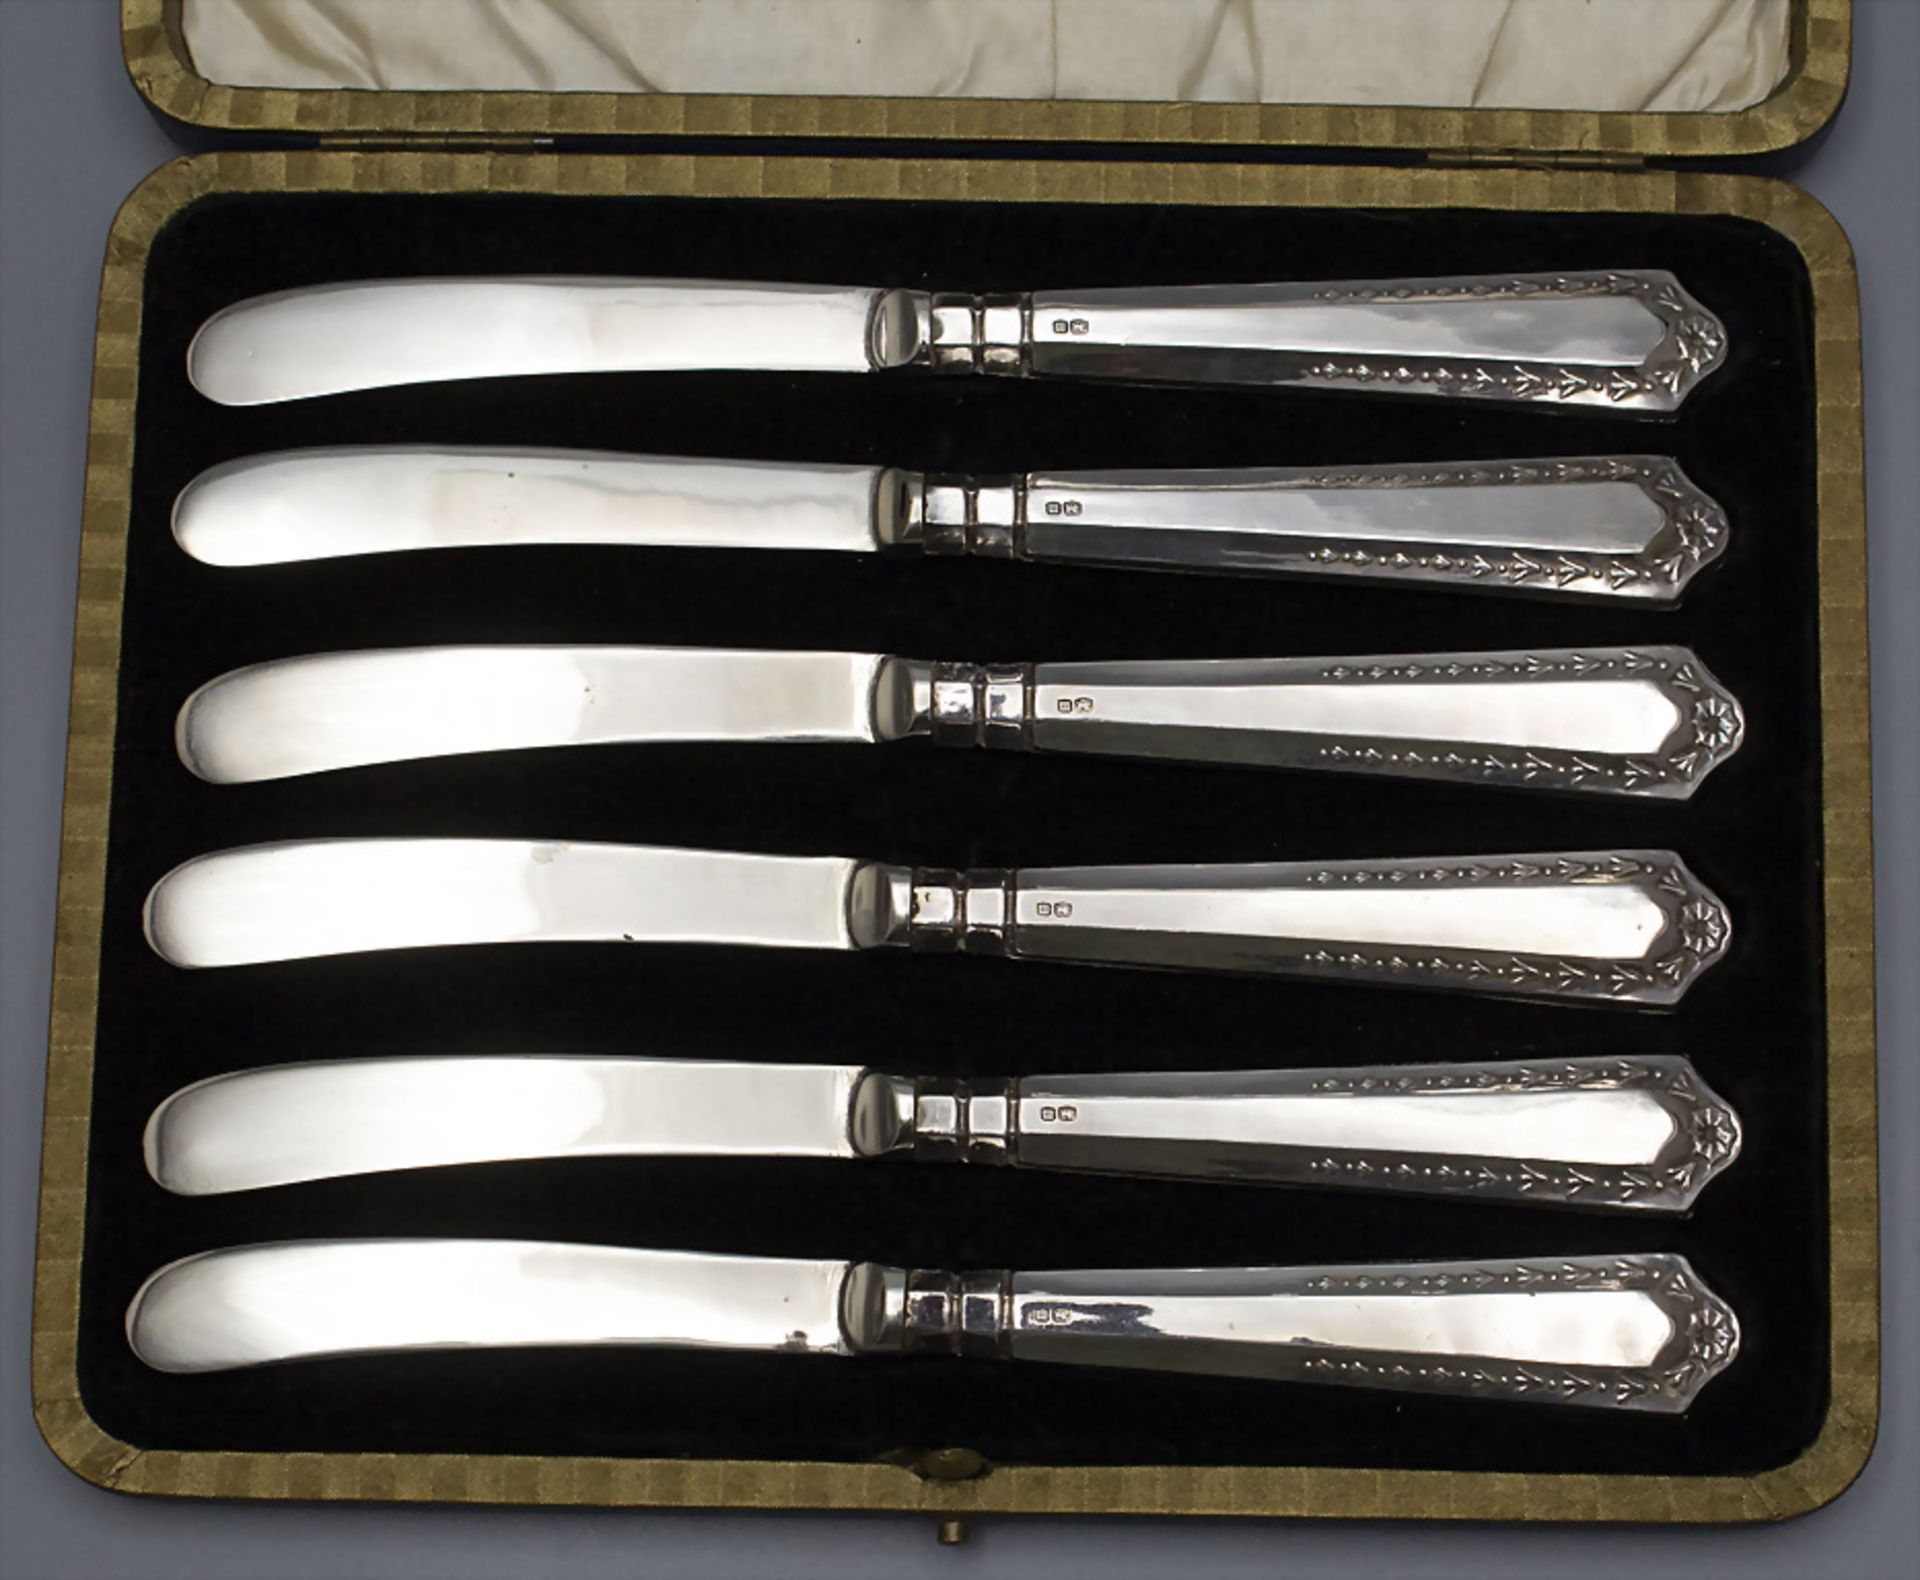 6 Buttermesser im Etui / A set of 6 butter knives in a box, V.B. Vickers & Co., Sheffield, 1929